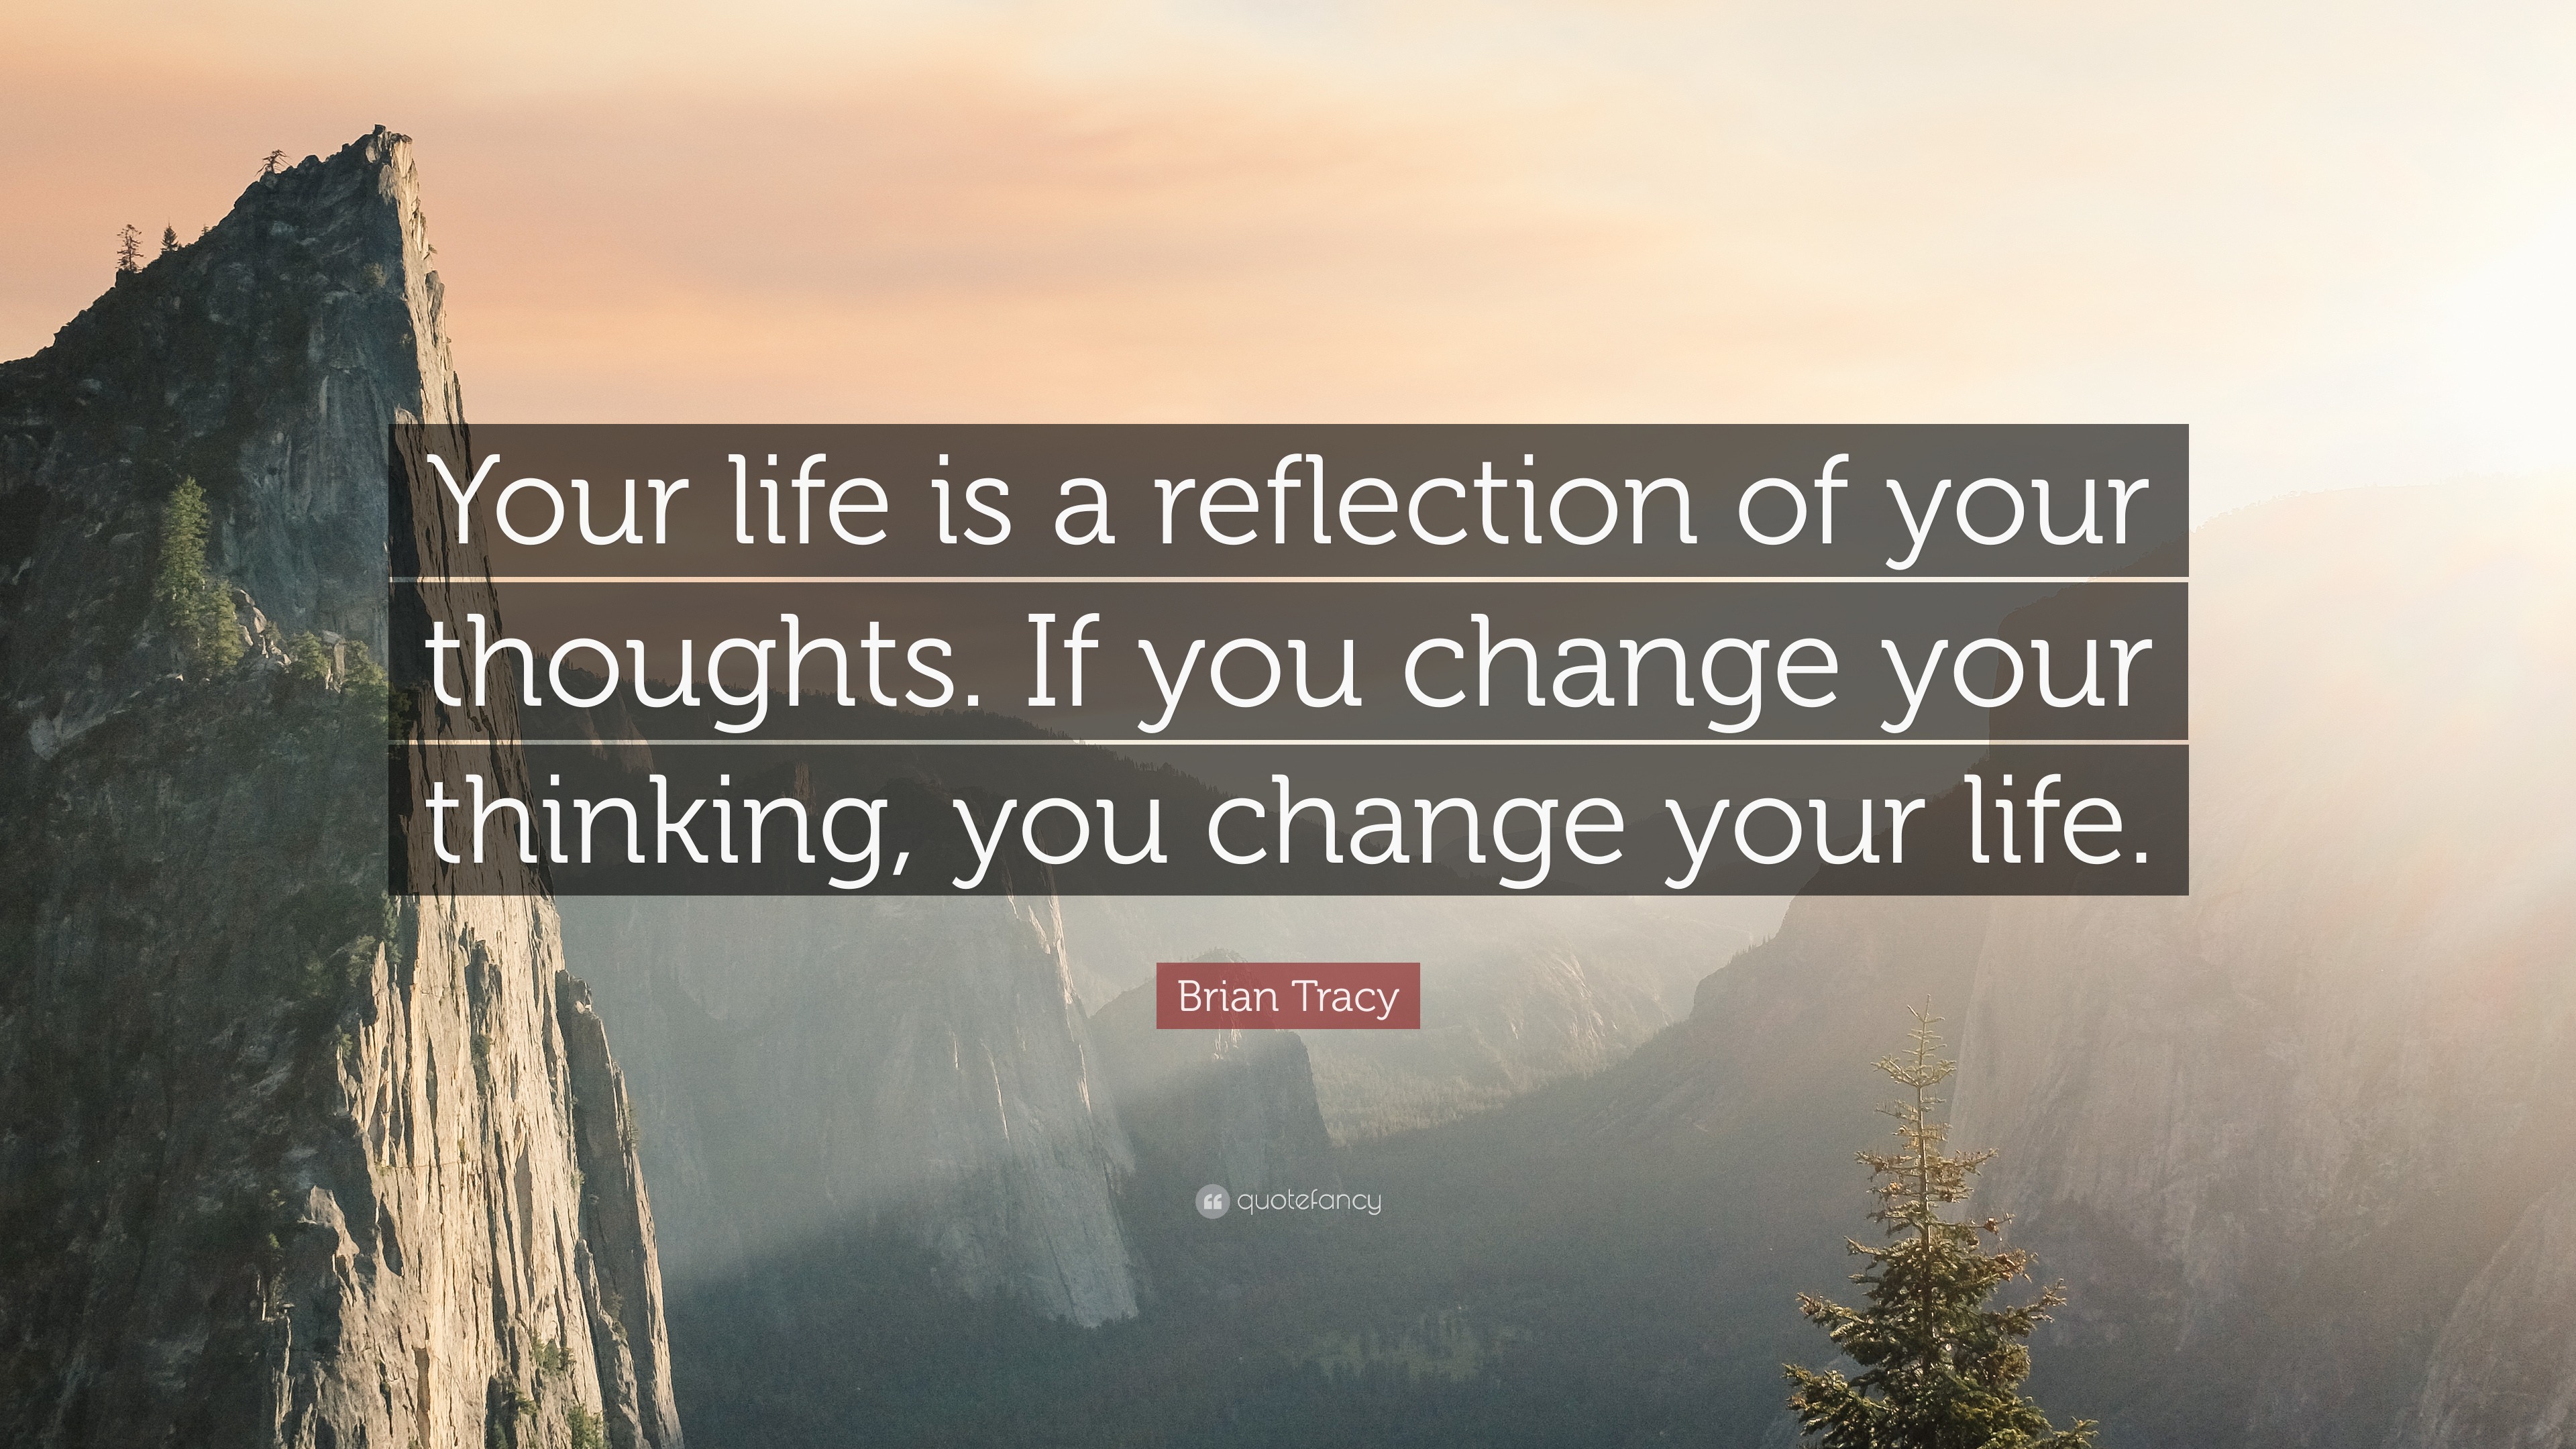 Brian Tracy Quote   Your  life  is a reflection of your  